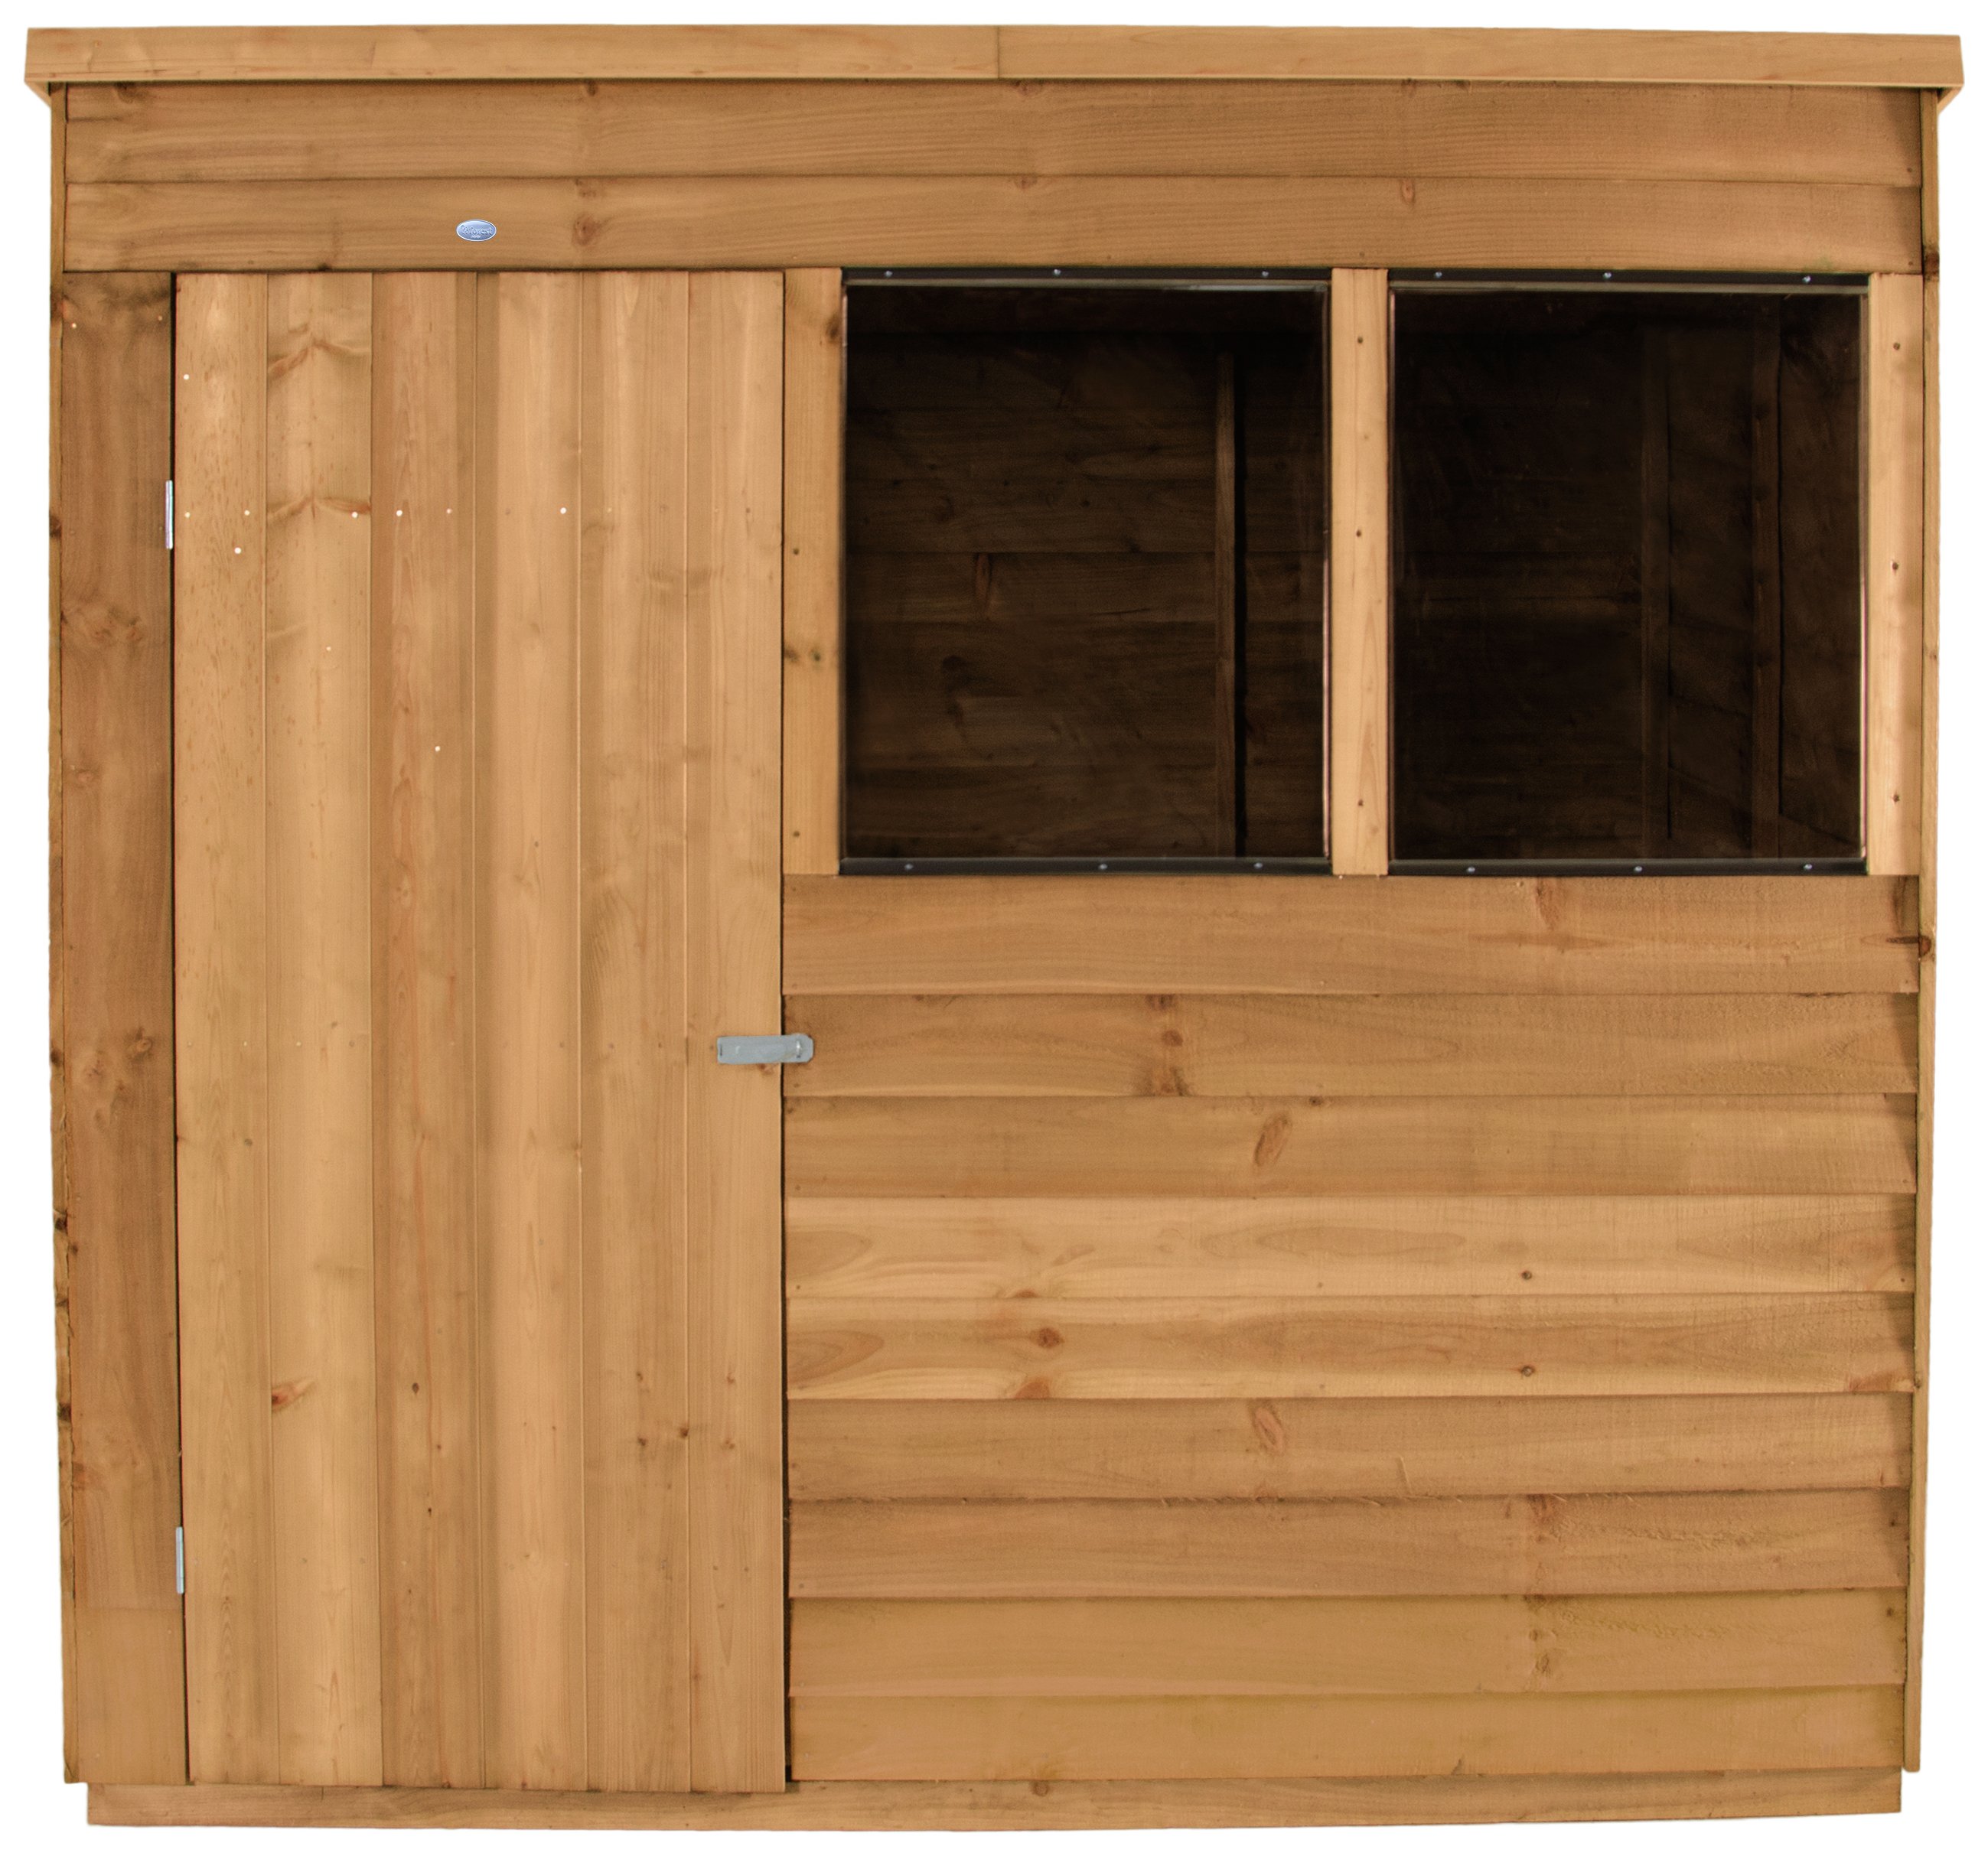 Forest 7 x 5ft Overlap Wooden Pent Shed